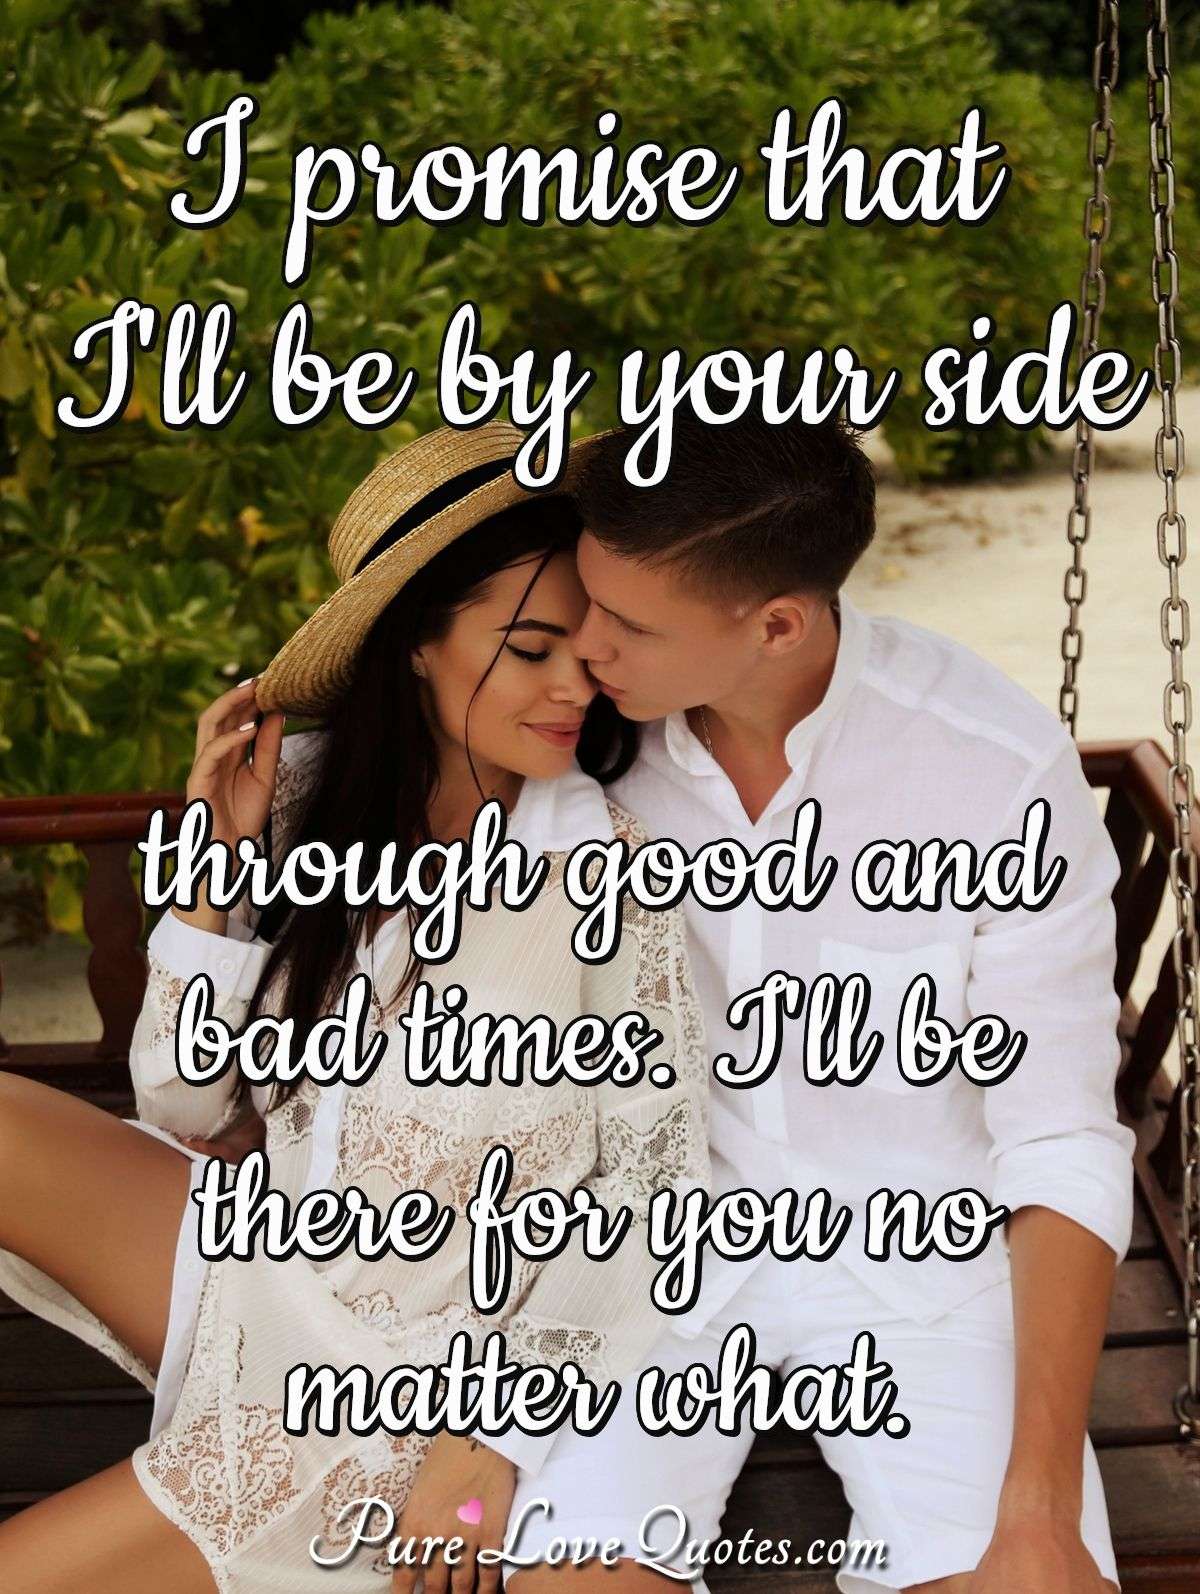 I promise that I'll be by your side through good and bad times. I'll be there for you no matter what. - Anonymous